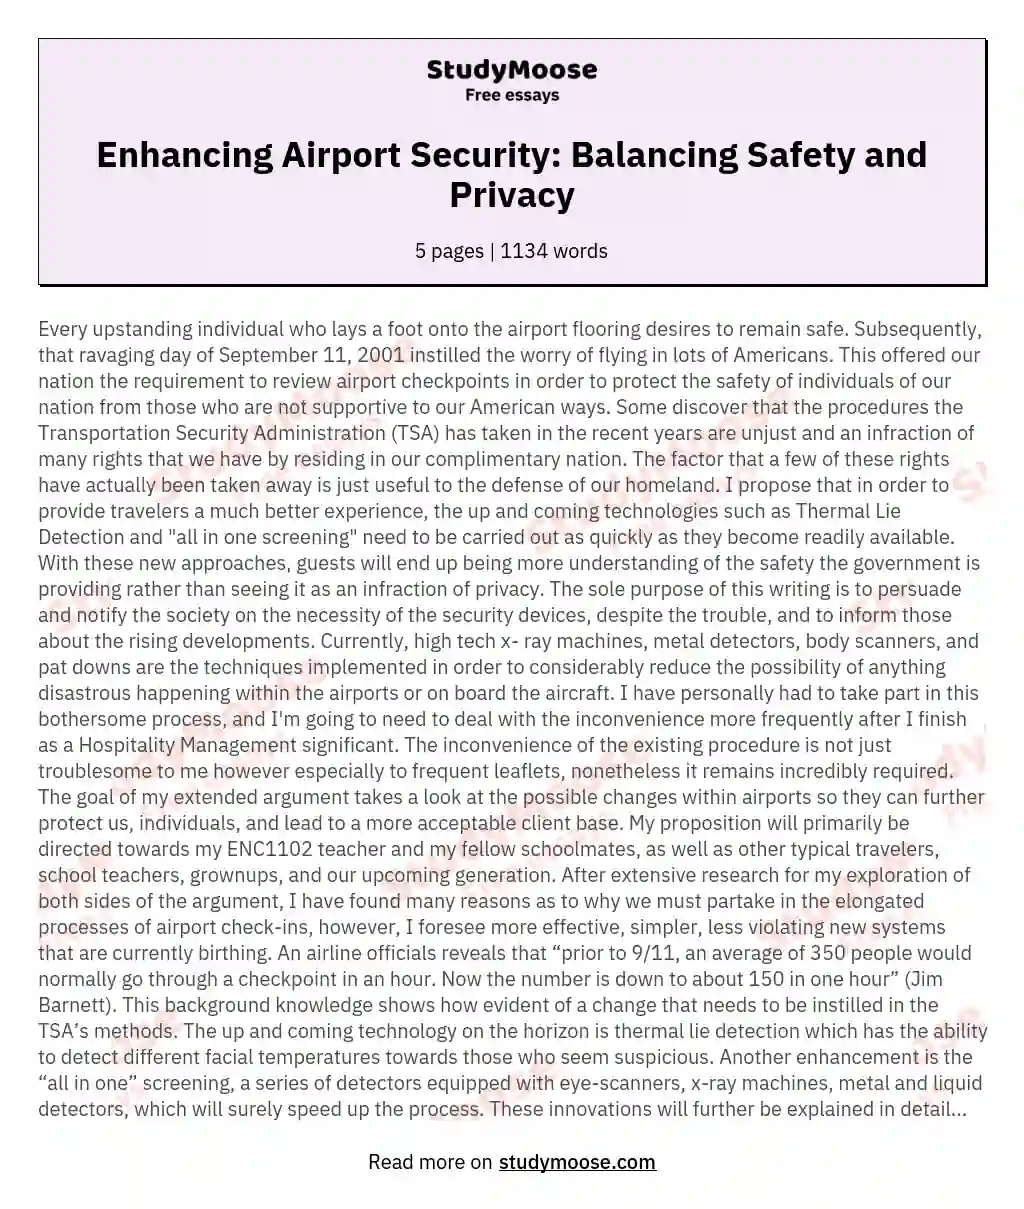 Enhancing Airport Security: Balancing Safety and Privacy essay